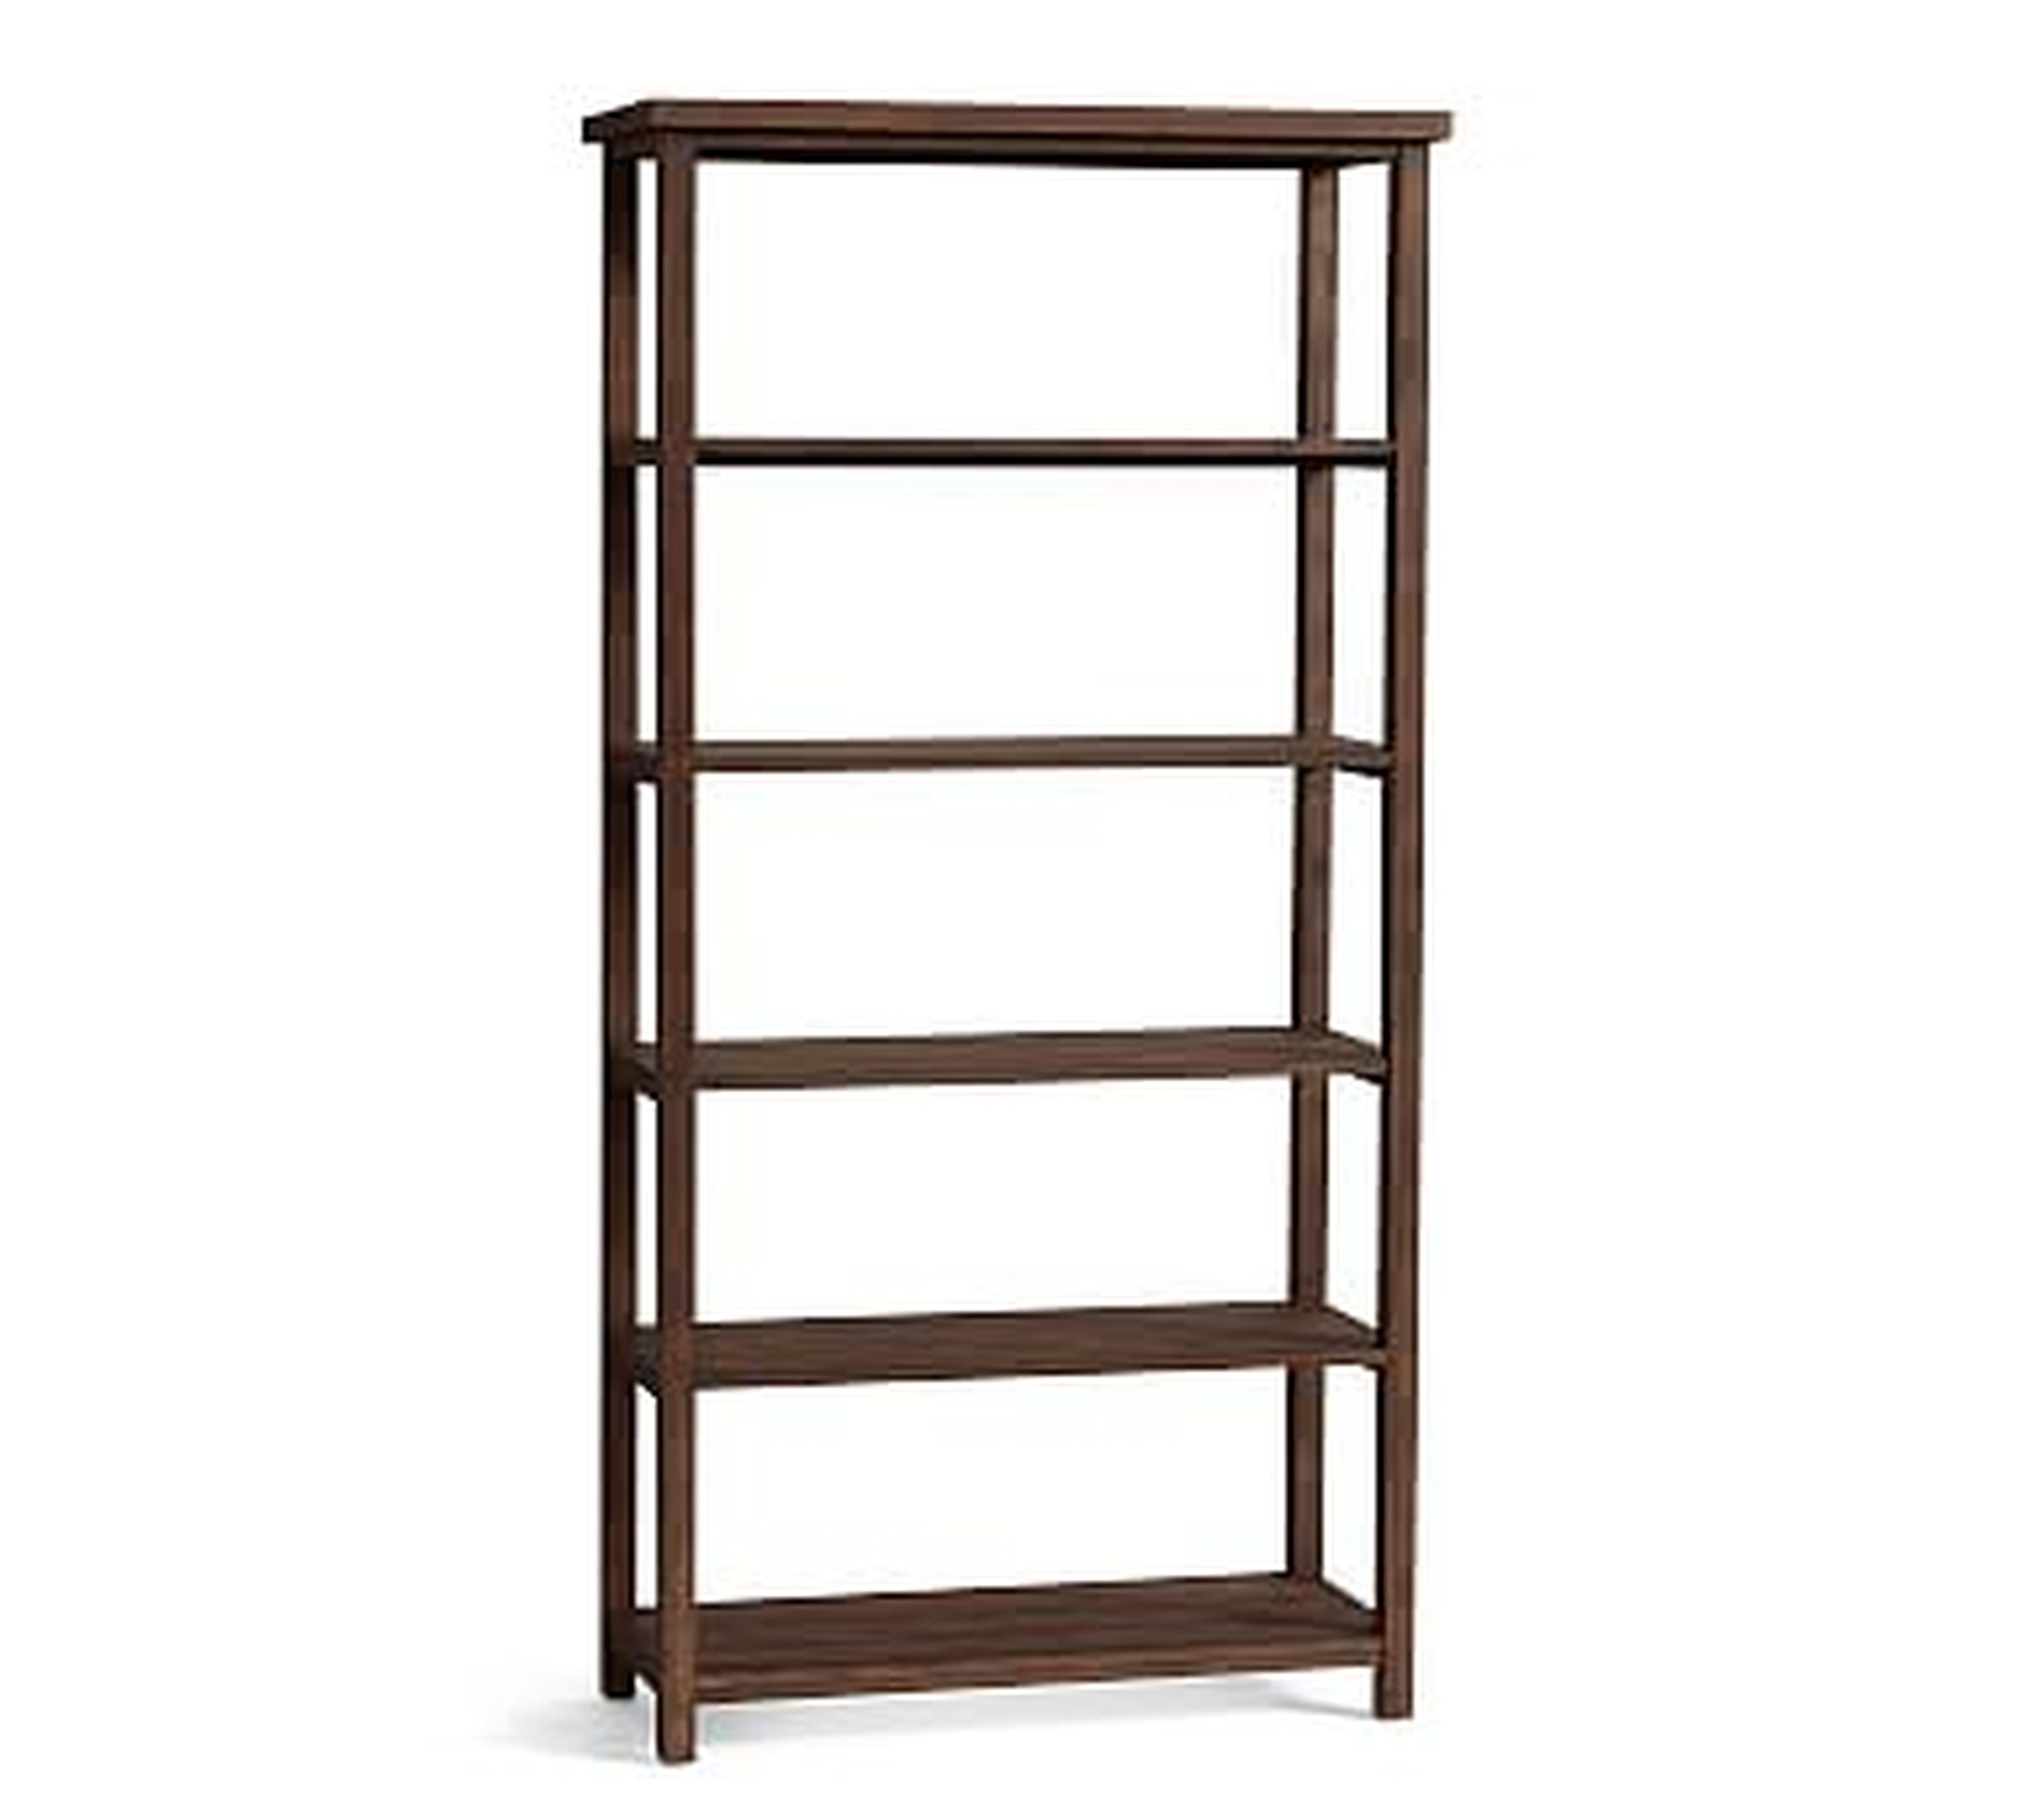 Mateo Wide Etagere Bookcase, Salvaged Black, 36"L x 72"H - Pottery Barn